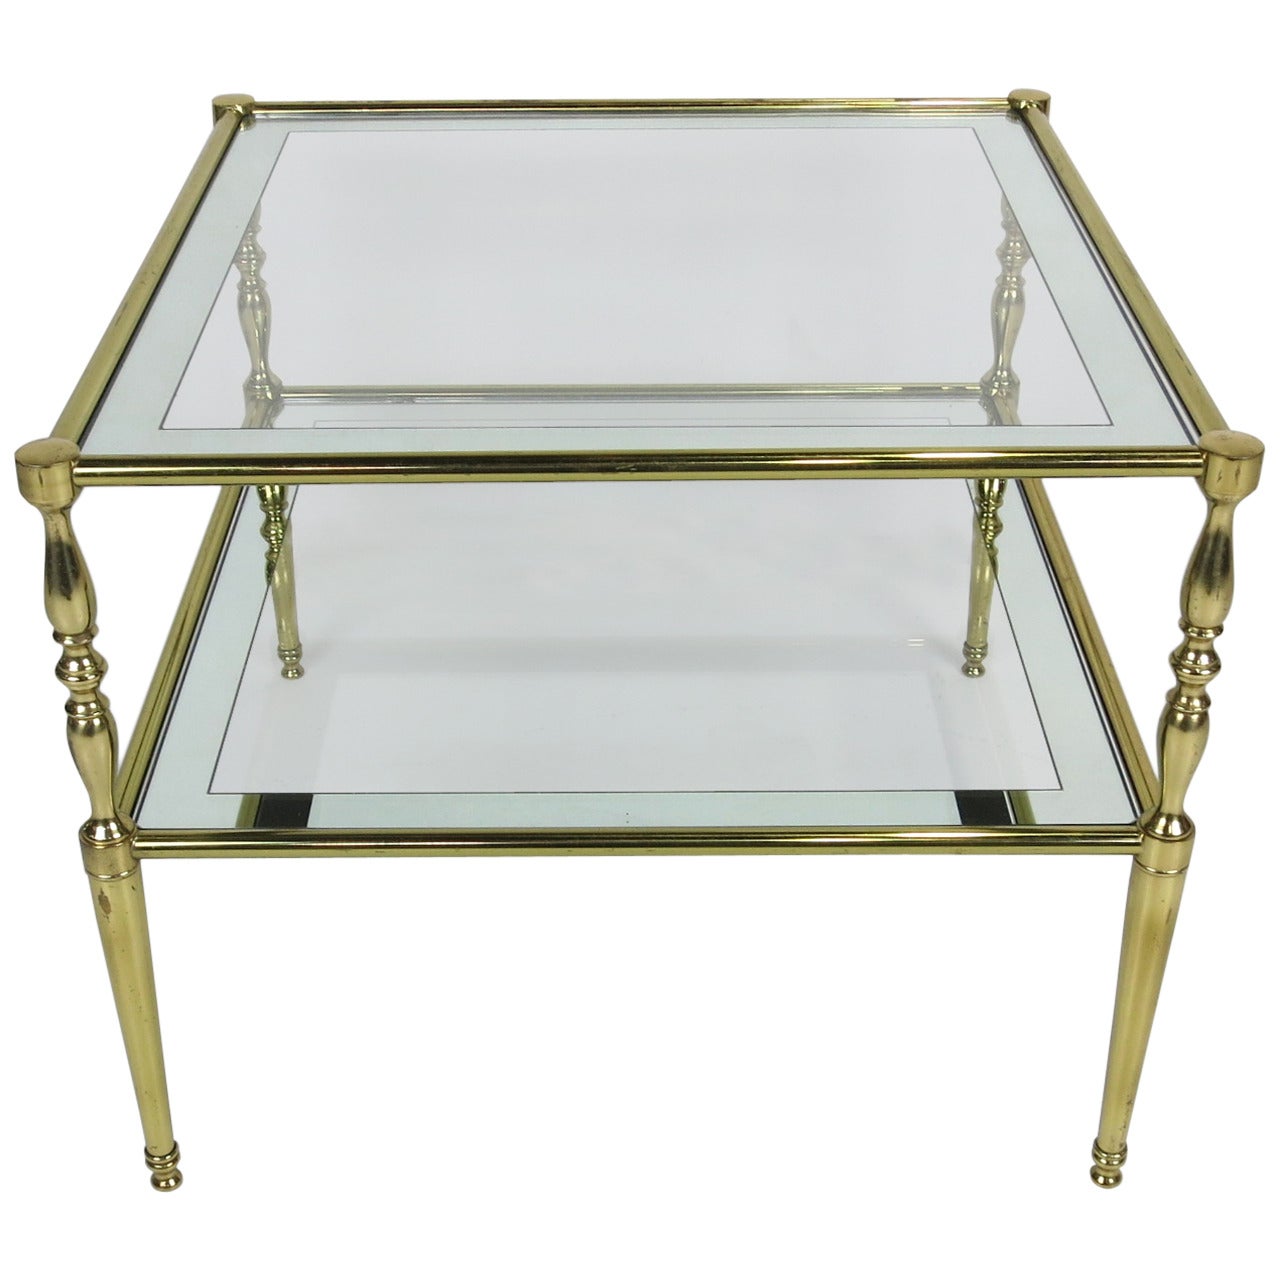 Italian Brass Chiavari Style Side Table with Mirror Bordered Top